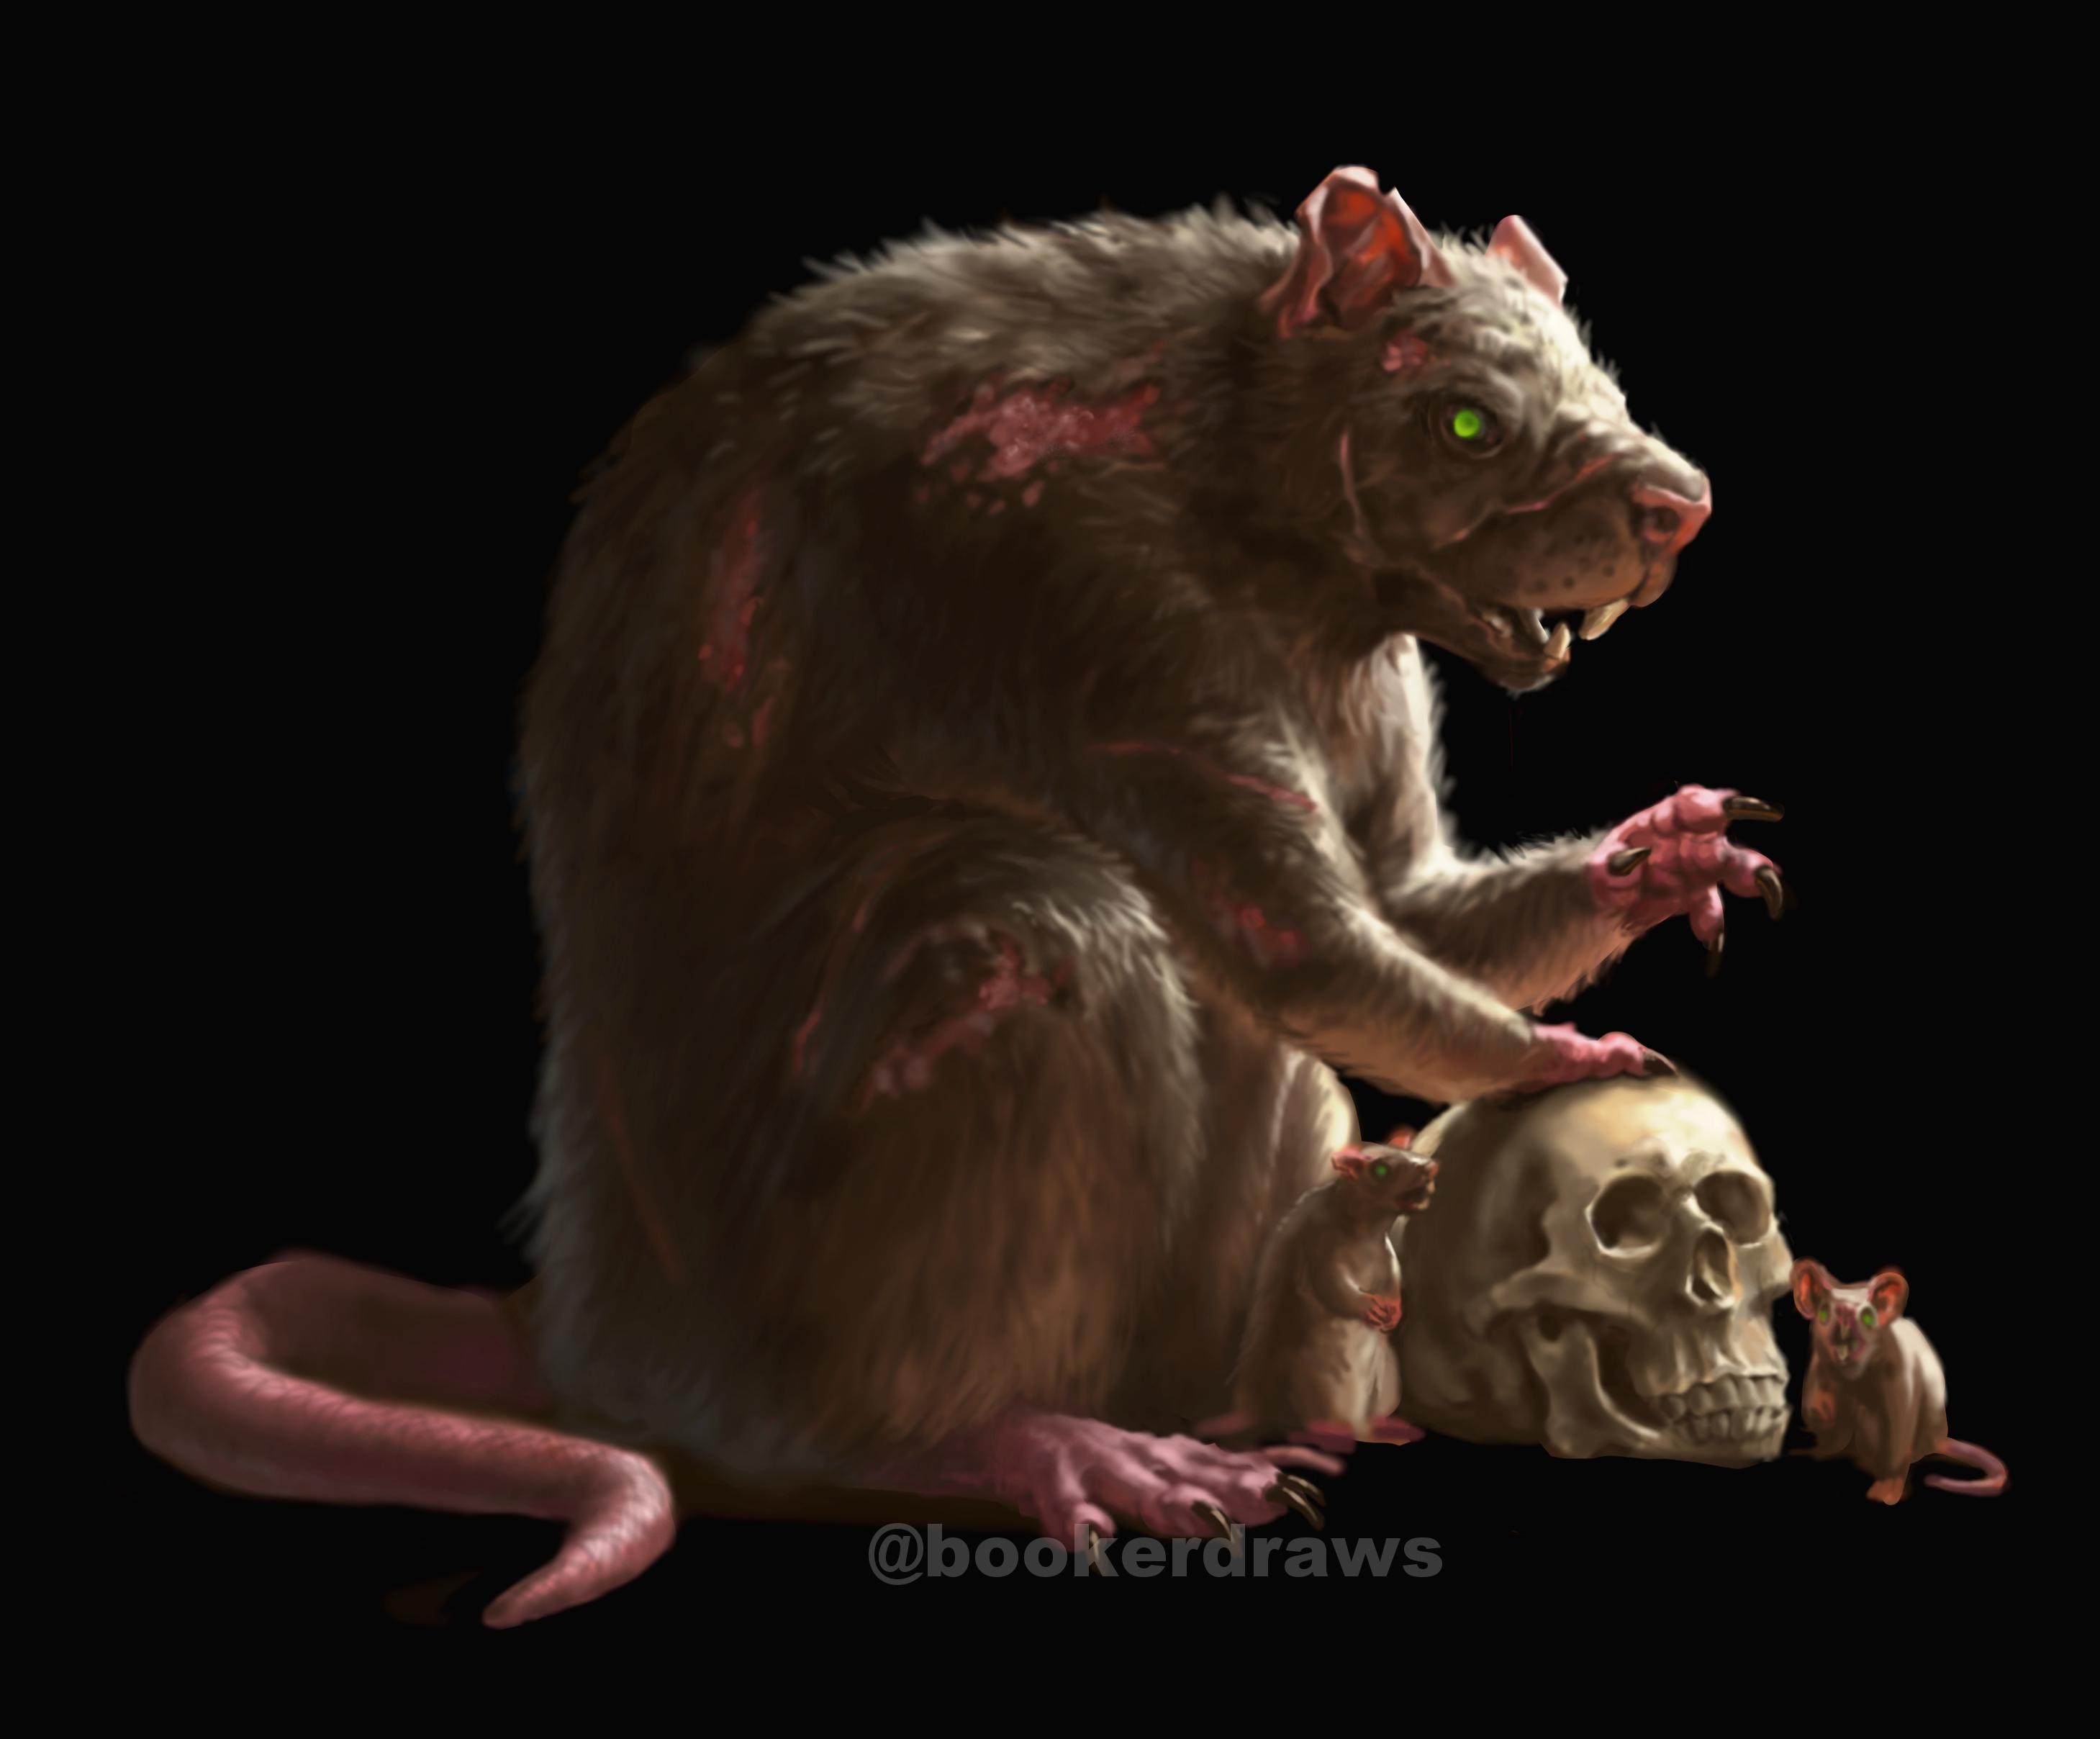 Mutated Rodents of Unusual Size